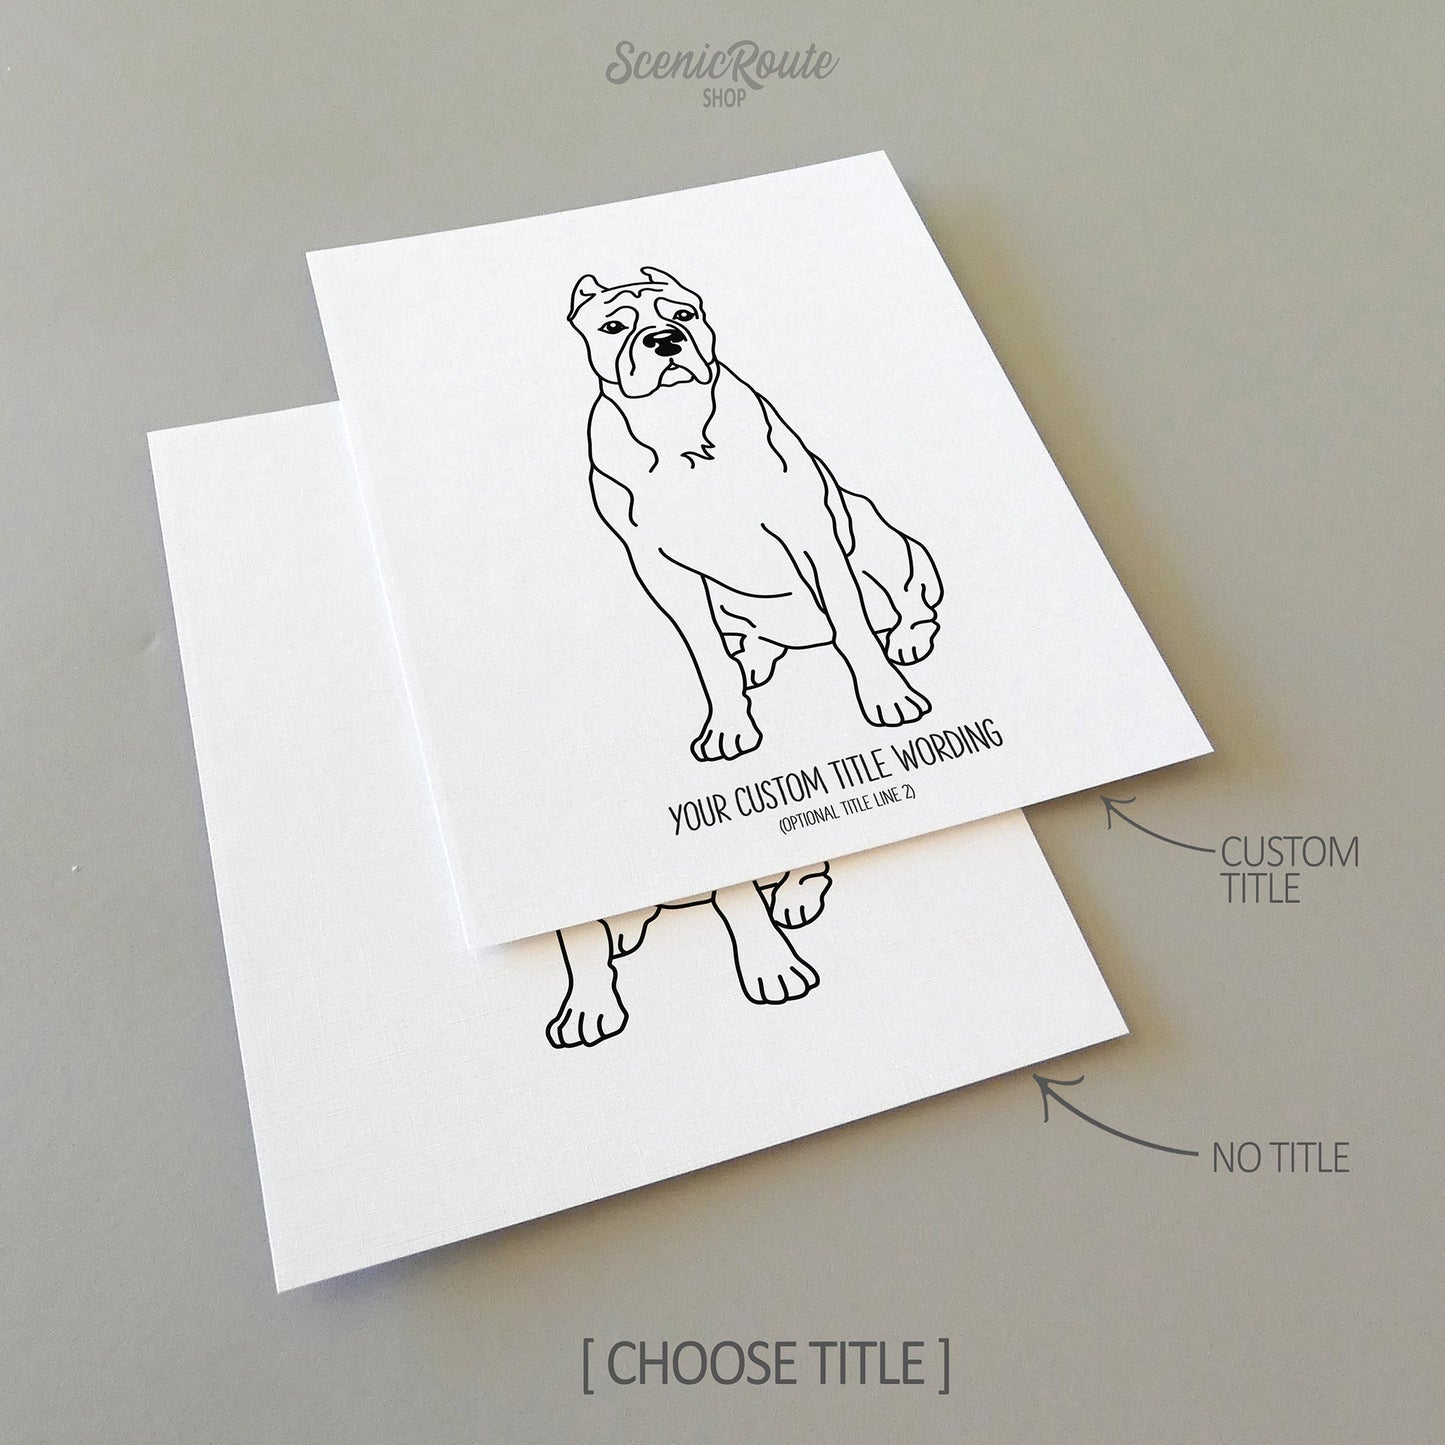 Two drawings of a Cane Corso dog on white linen paper with a gray background.  Pieces are shown with “No Title” and “Custom Title” options to illustrate the available art print options.